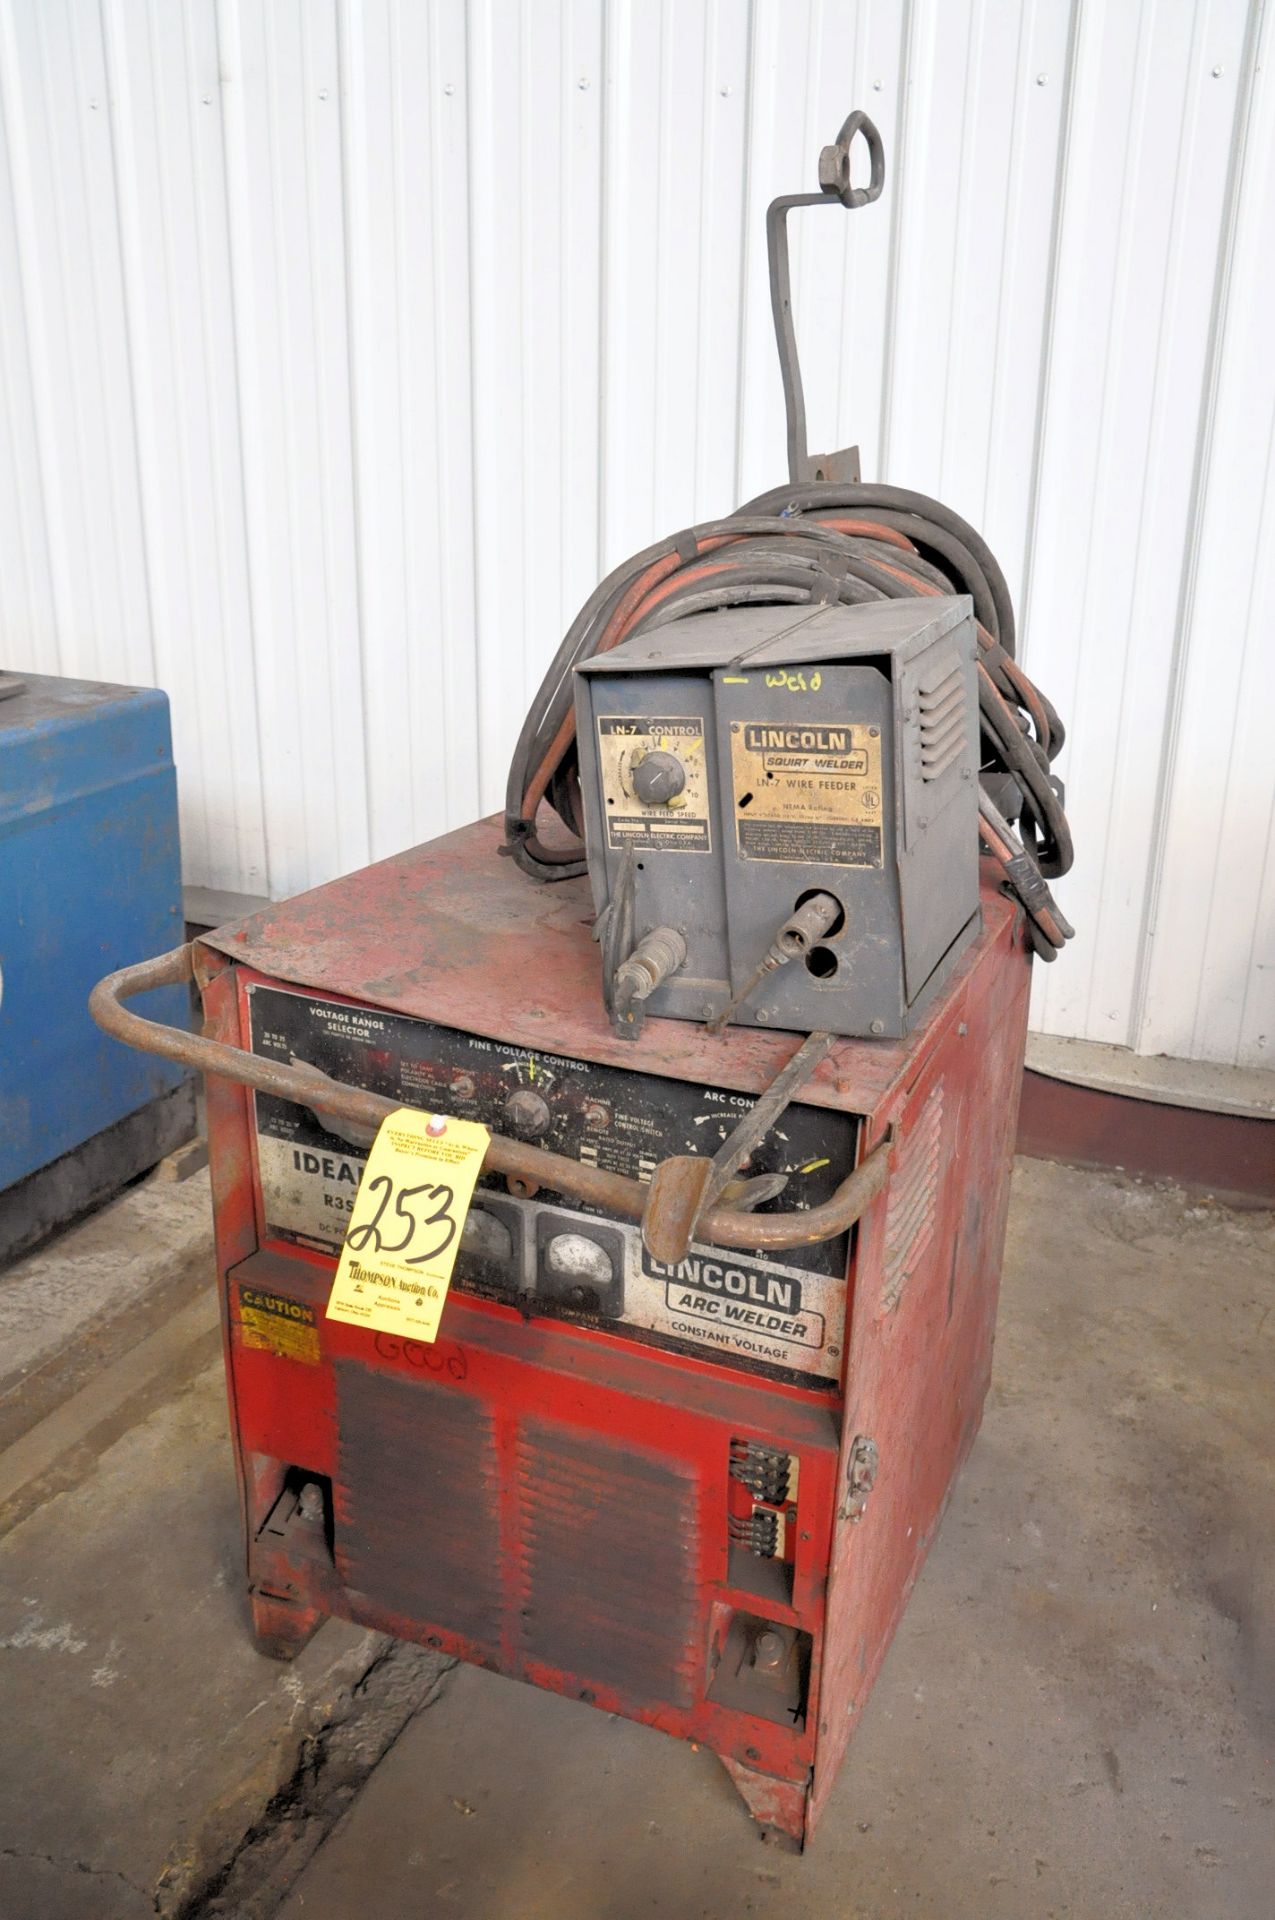 Lincoln Idealarc R3S-325, 325-Amp Capacity DC Arc Welding Power Source, S/n AC400945, with Lincoln